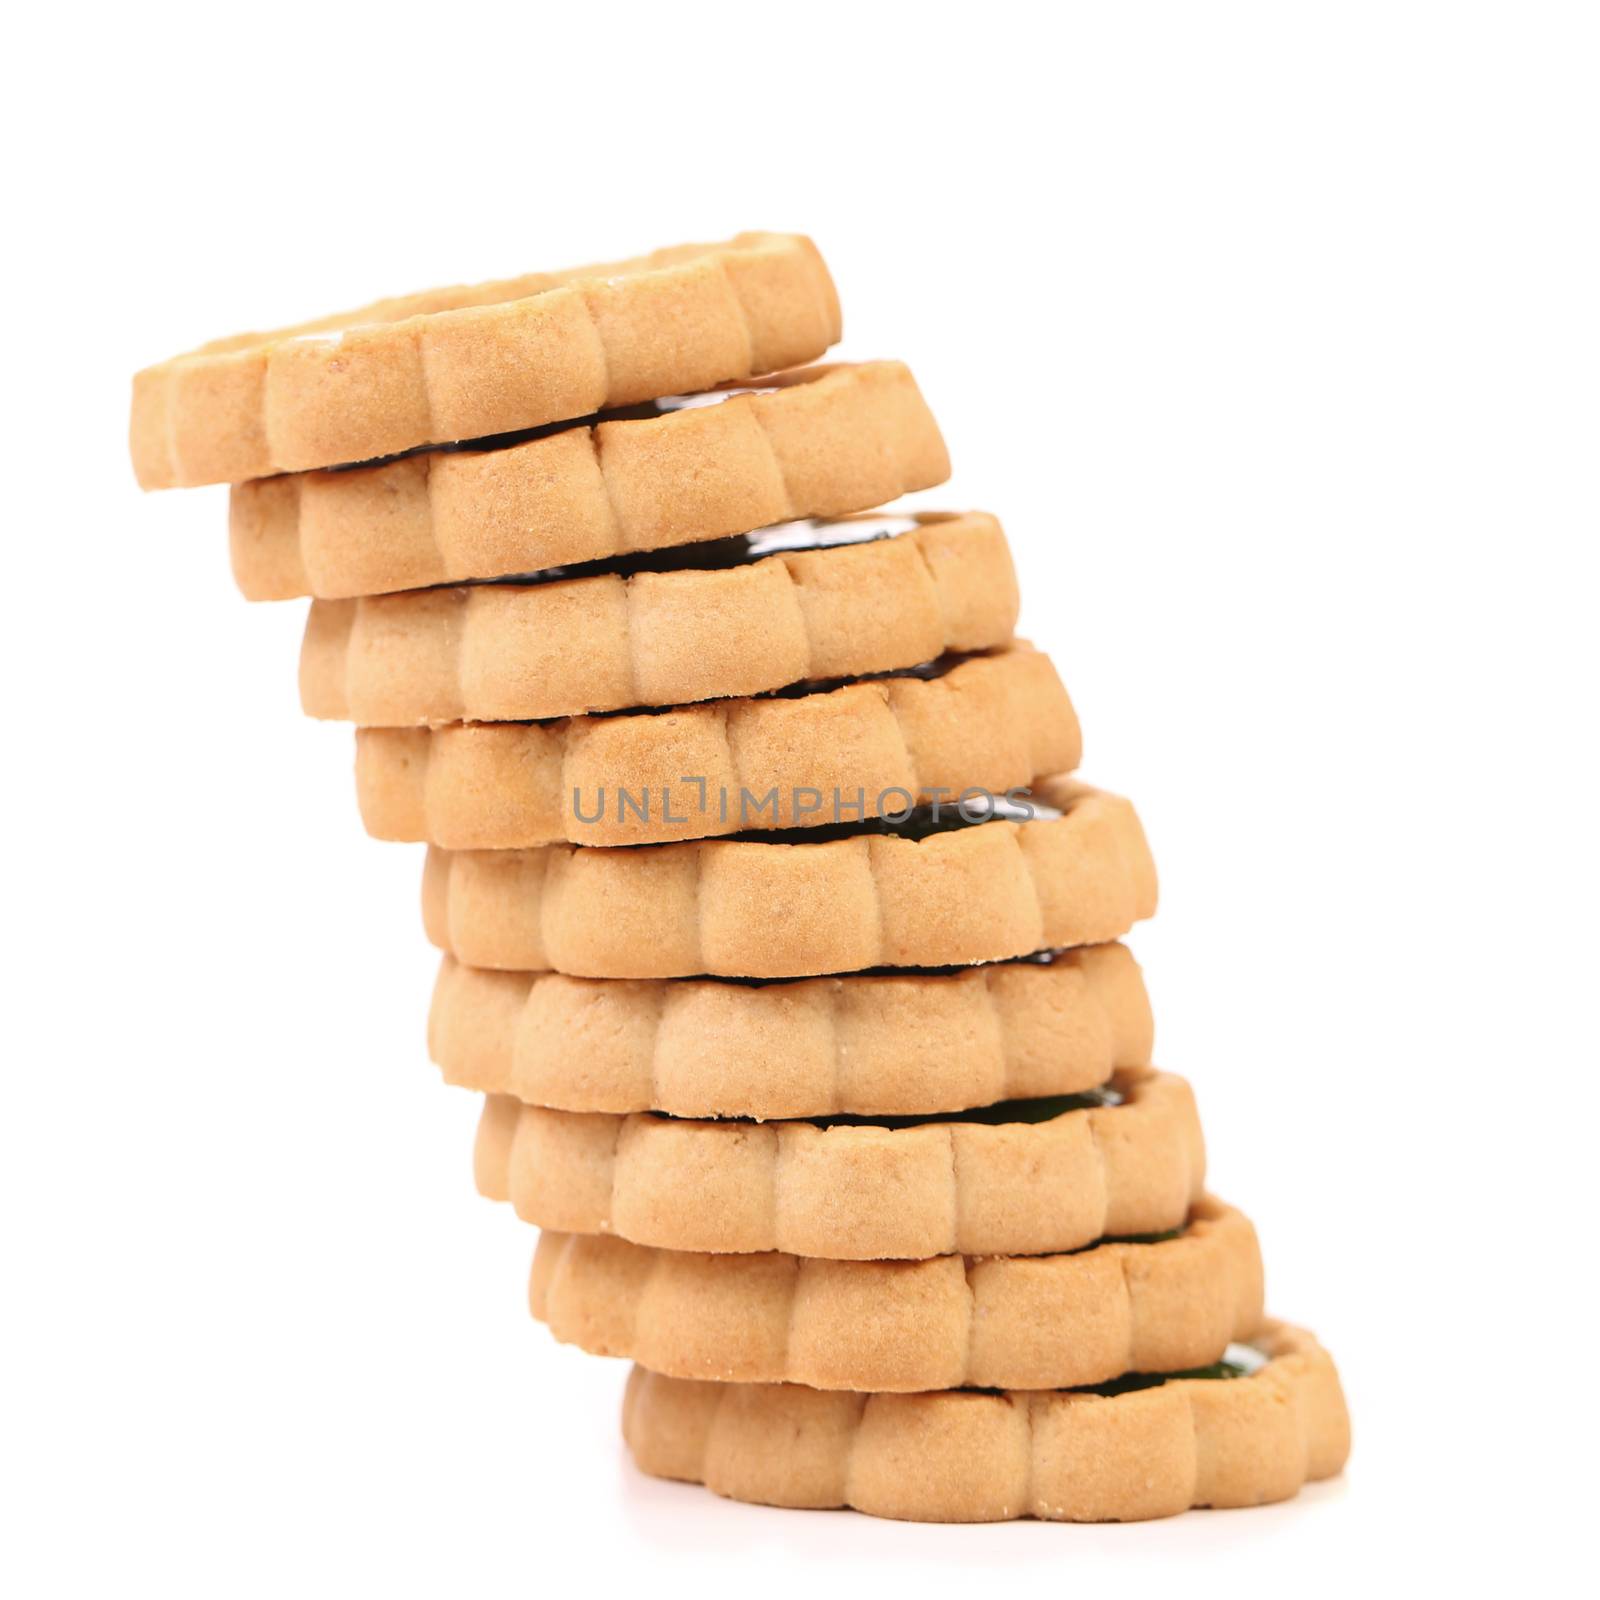 Stacks of cookies like piza tower. Isolated on a white background.